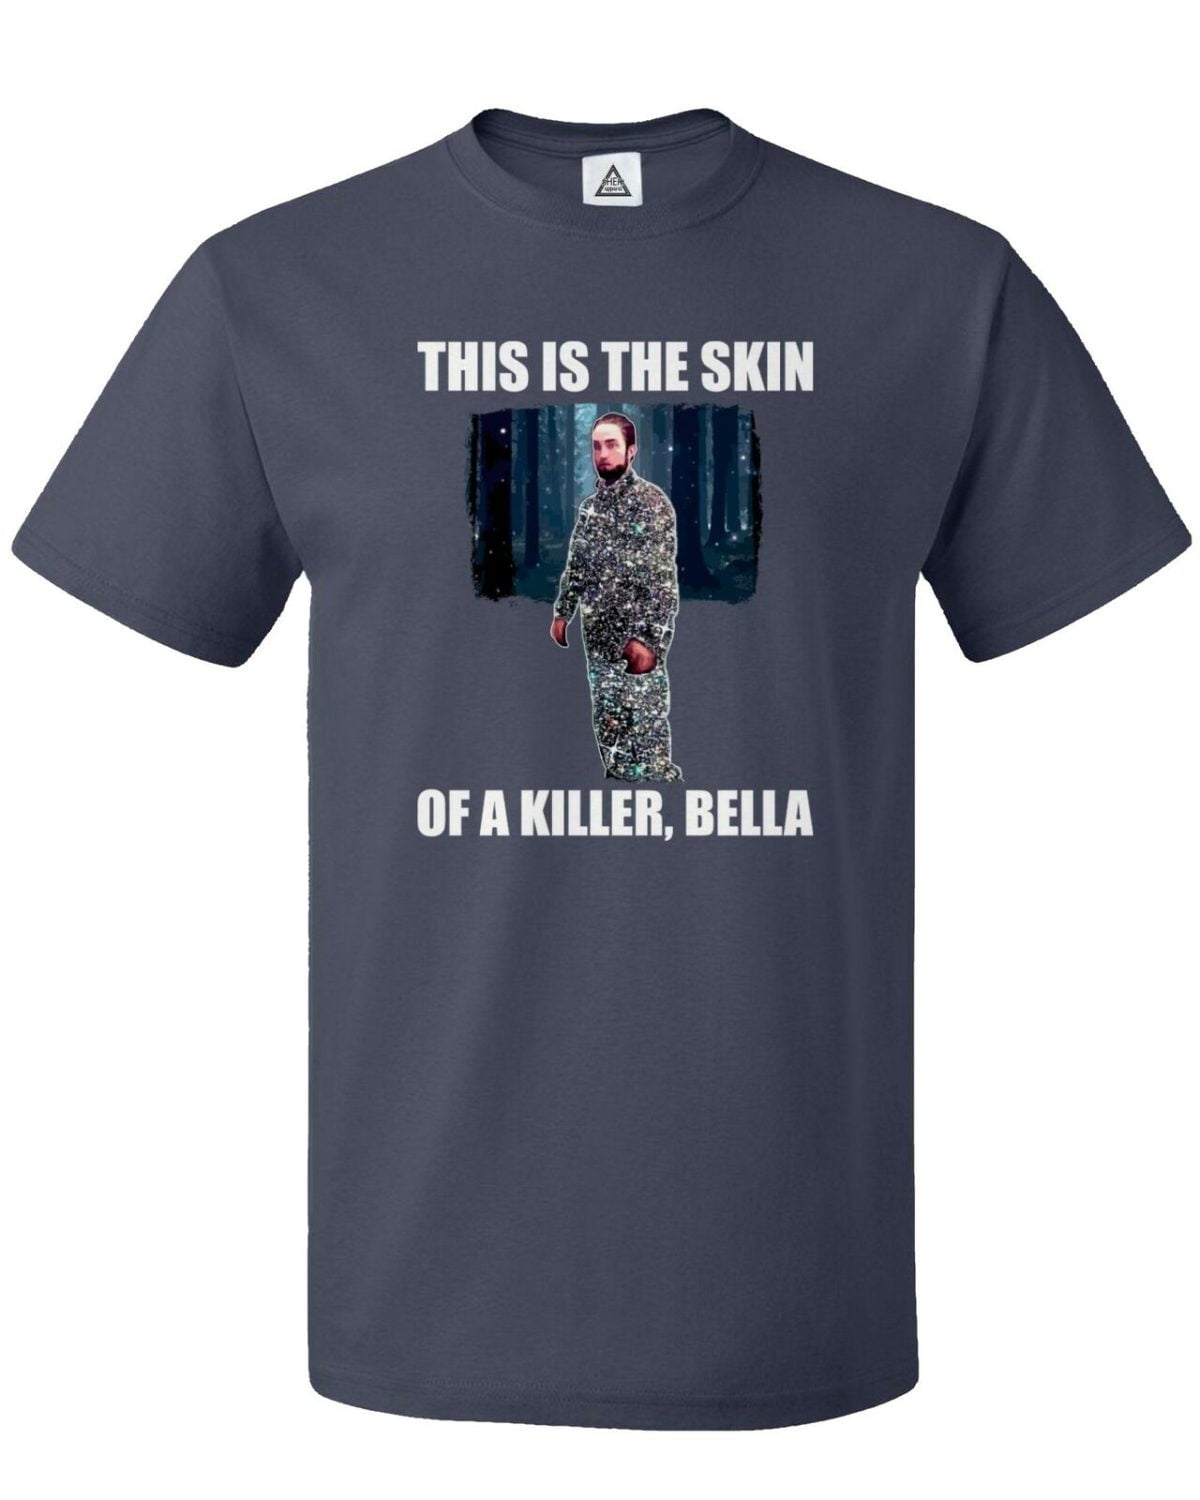 This Is The Skin Of A Killer, Bella T-Shirt